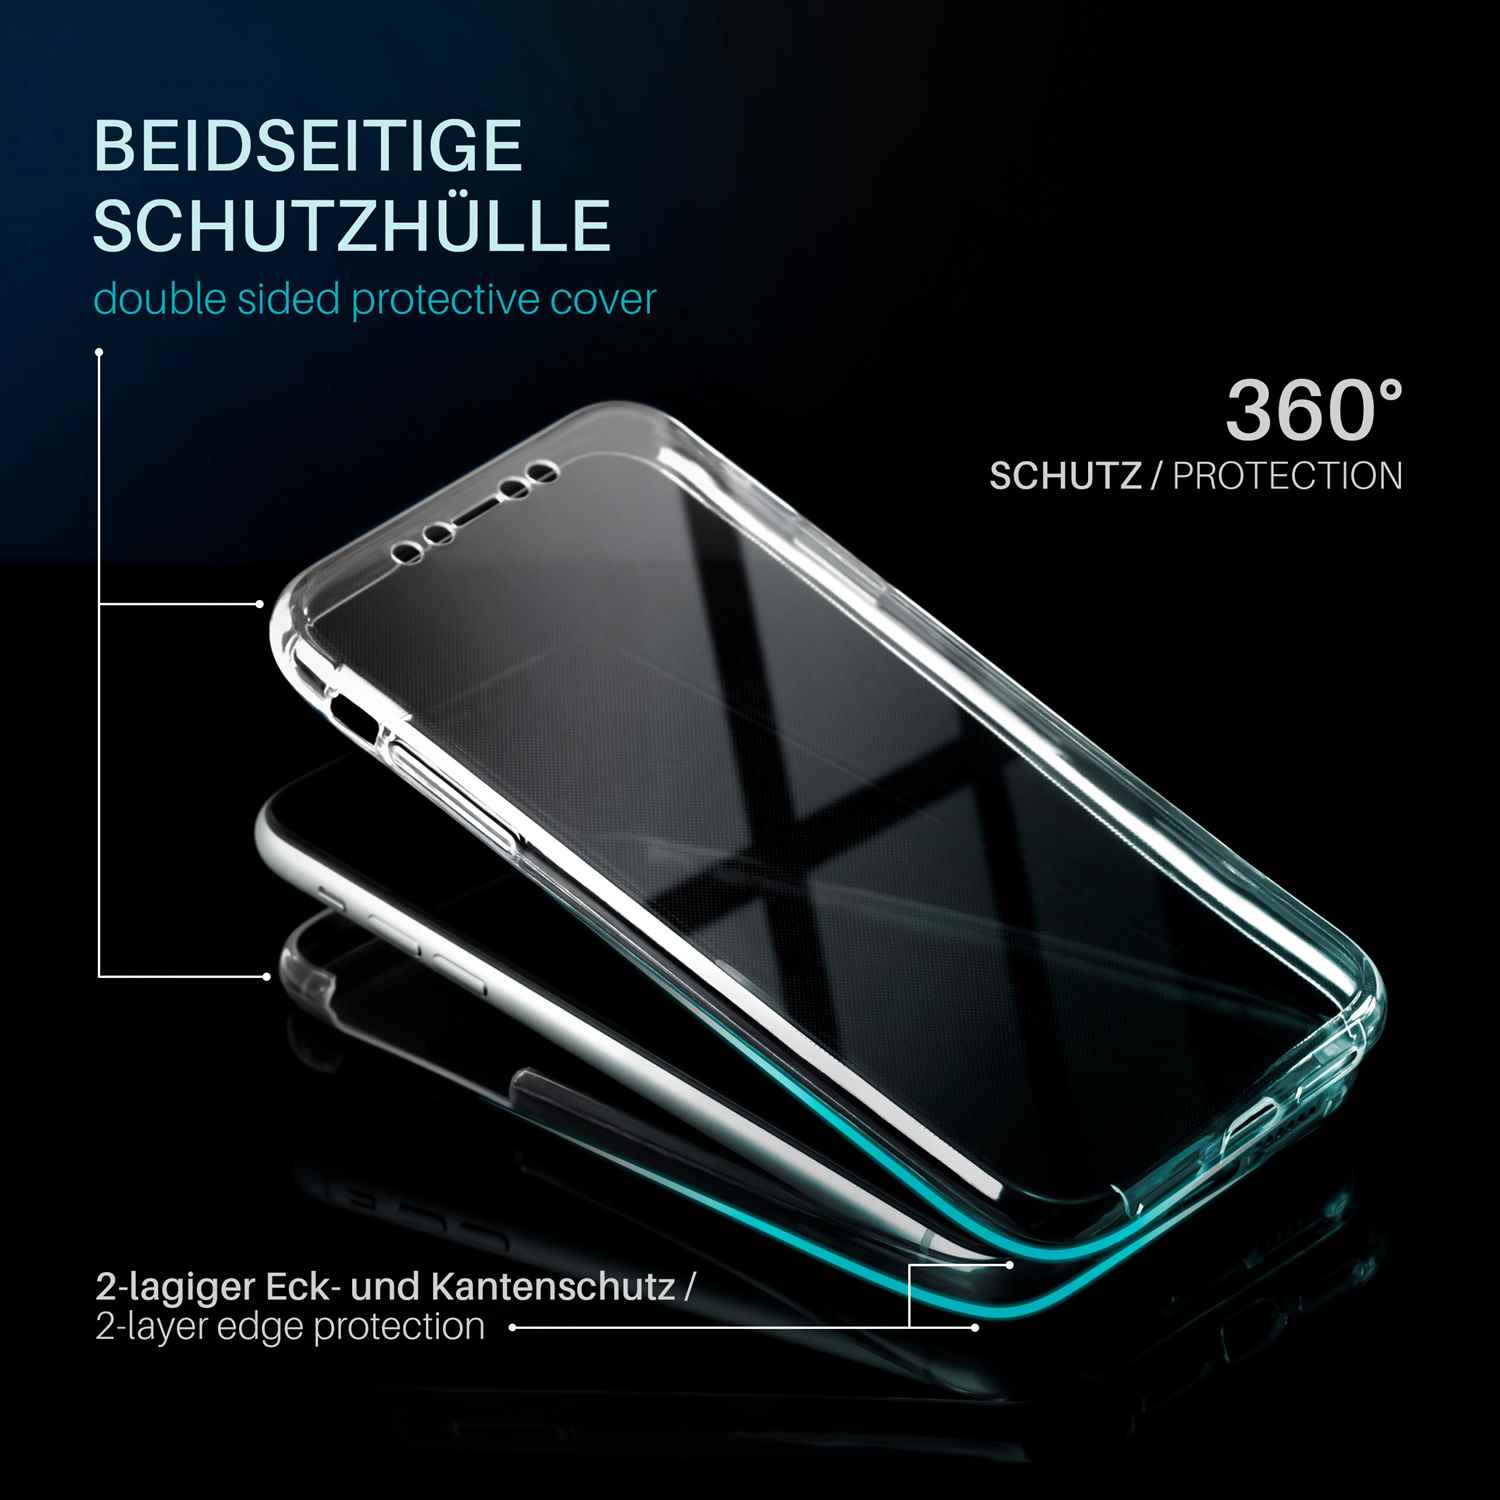 Full Galaxy Double Cover, Case, Crystal Neo, S5 MOEX Samsung,